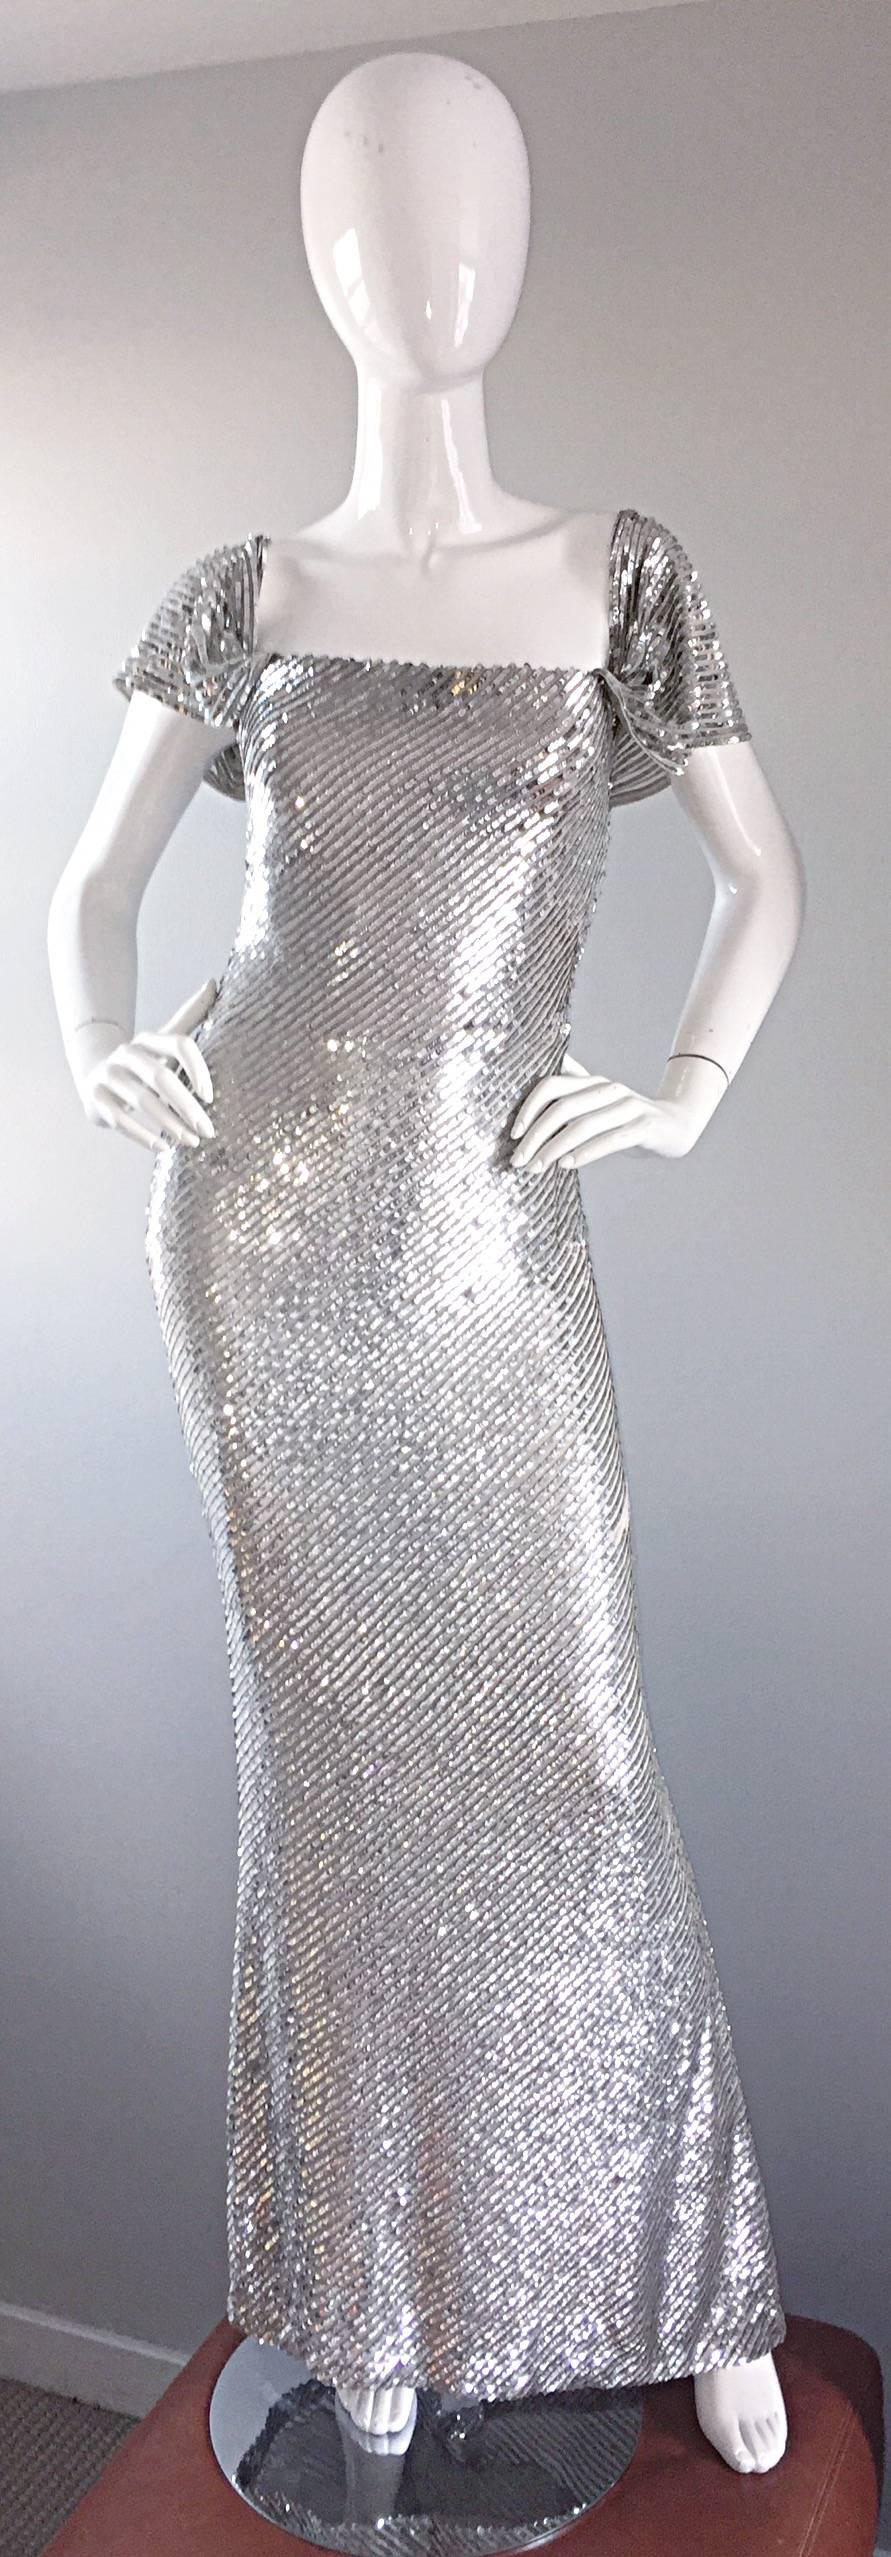 Bill Blass Couture Vintage Fully Sequined Silver Silk Grecian Gown  1